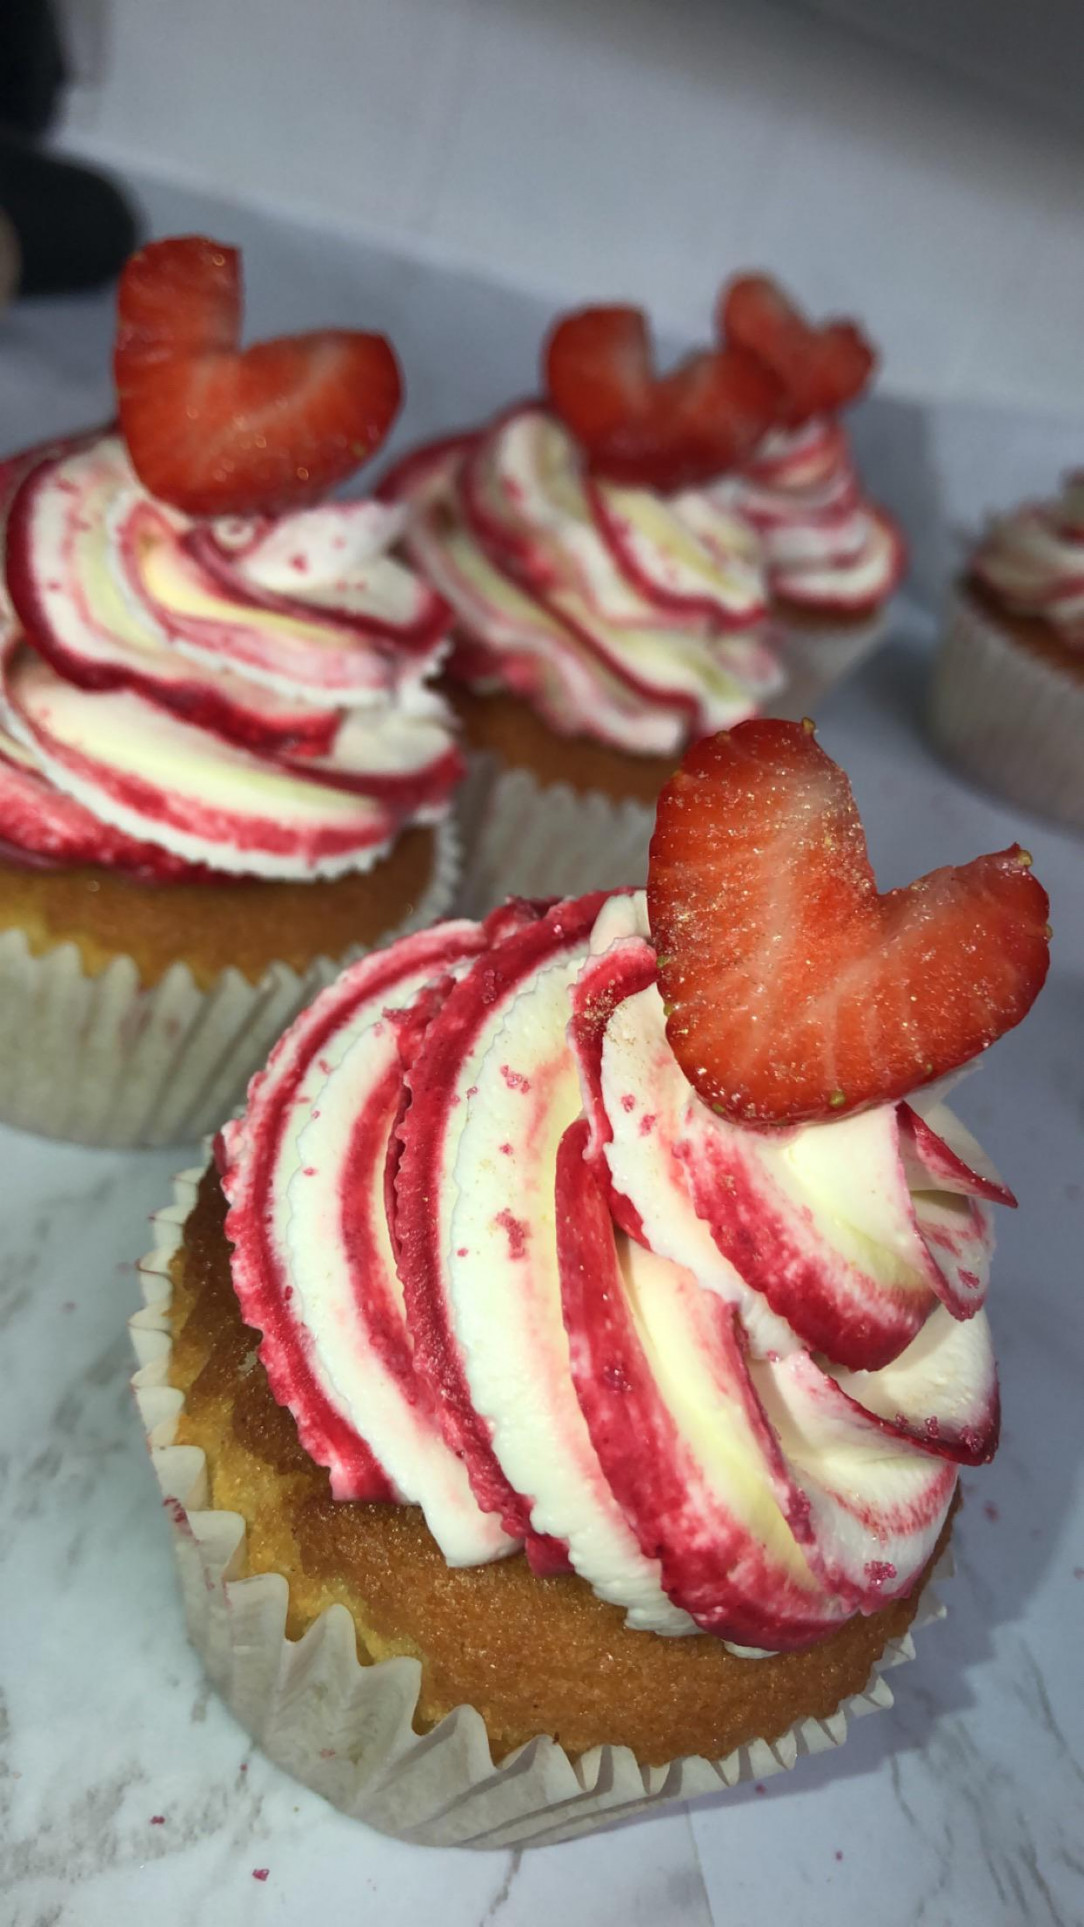 Though they look like Valentine’s Day cupcakes, the other day I randomly made some vanilla cupcakes filled with strawberry jam! (because why not)